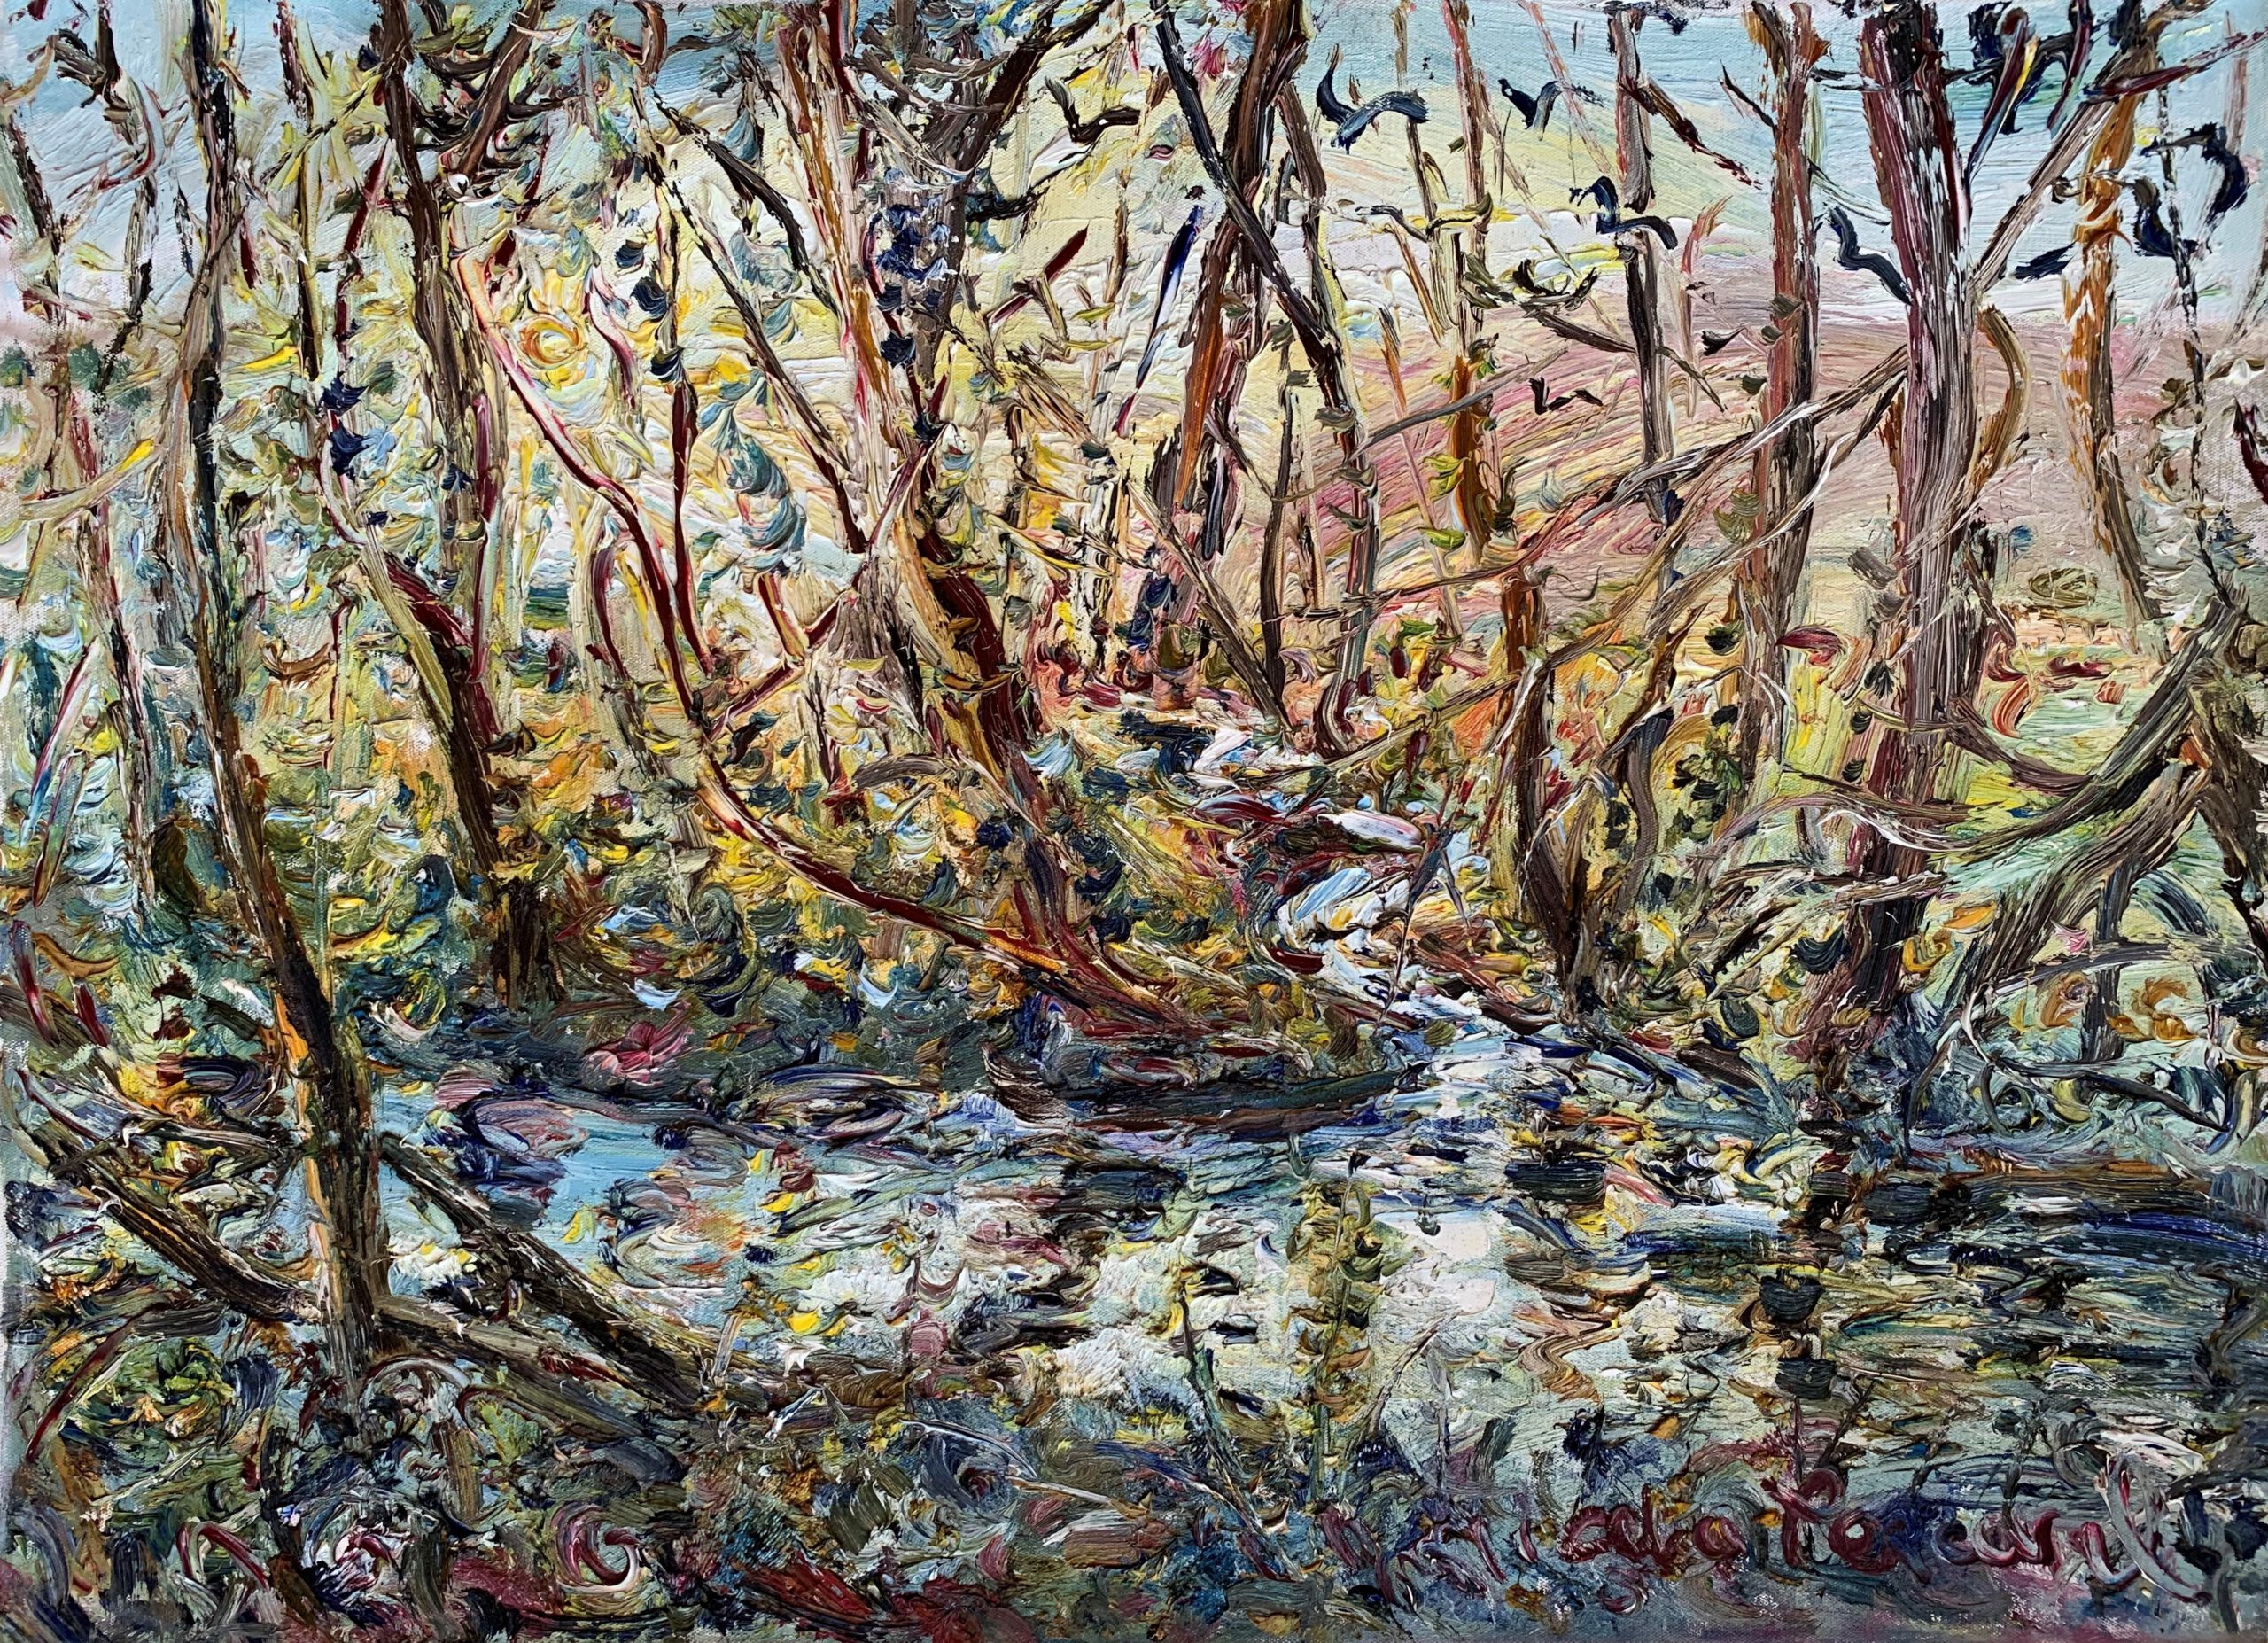 Celia Perceval 'Rooks Coming in to Roost at Sunset by the Hindwell Brook' oil on canvas 56 x 76cm $9,500